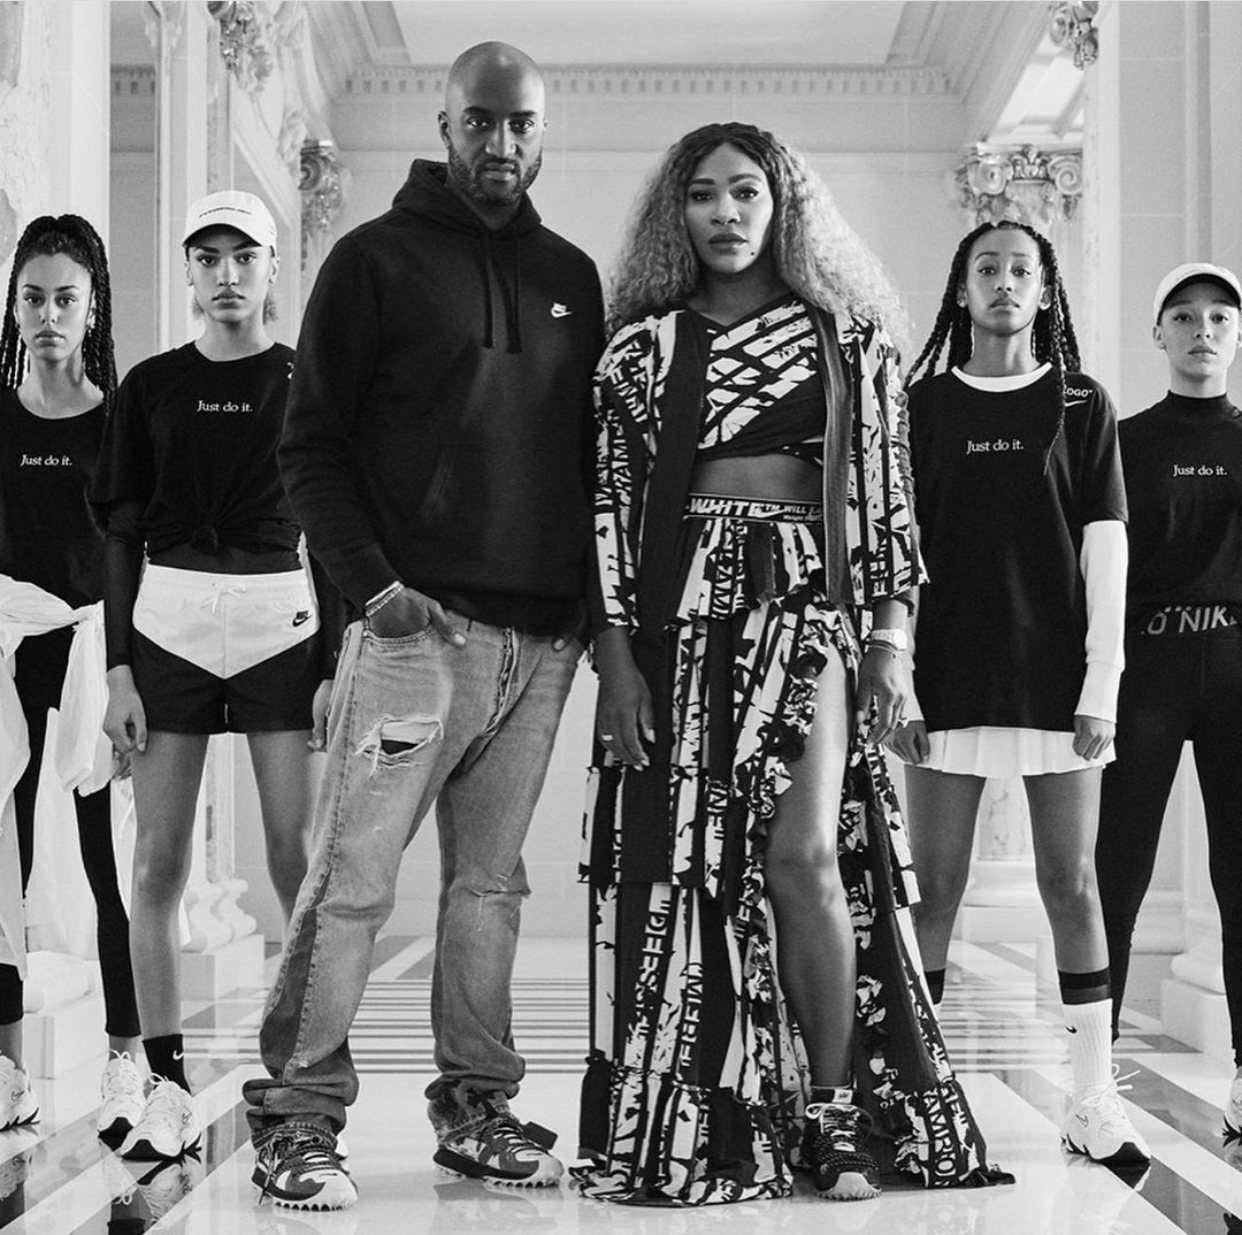 The State of Fashion: Virgil Abloh Predicts A Black Fashion